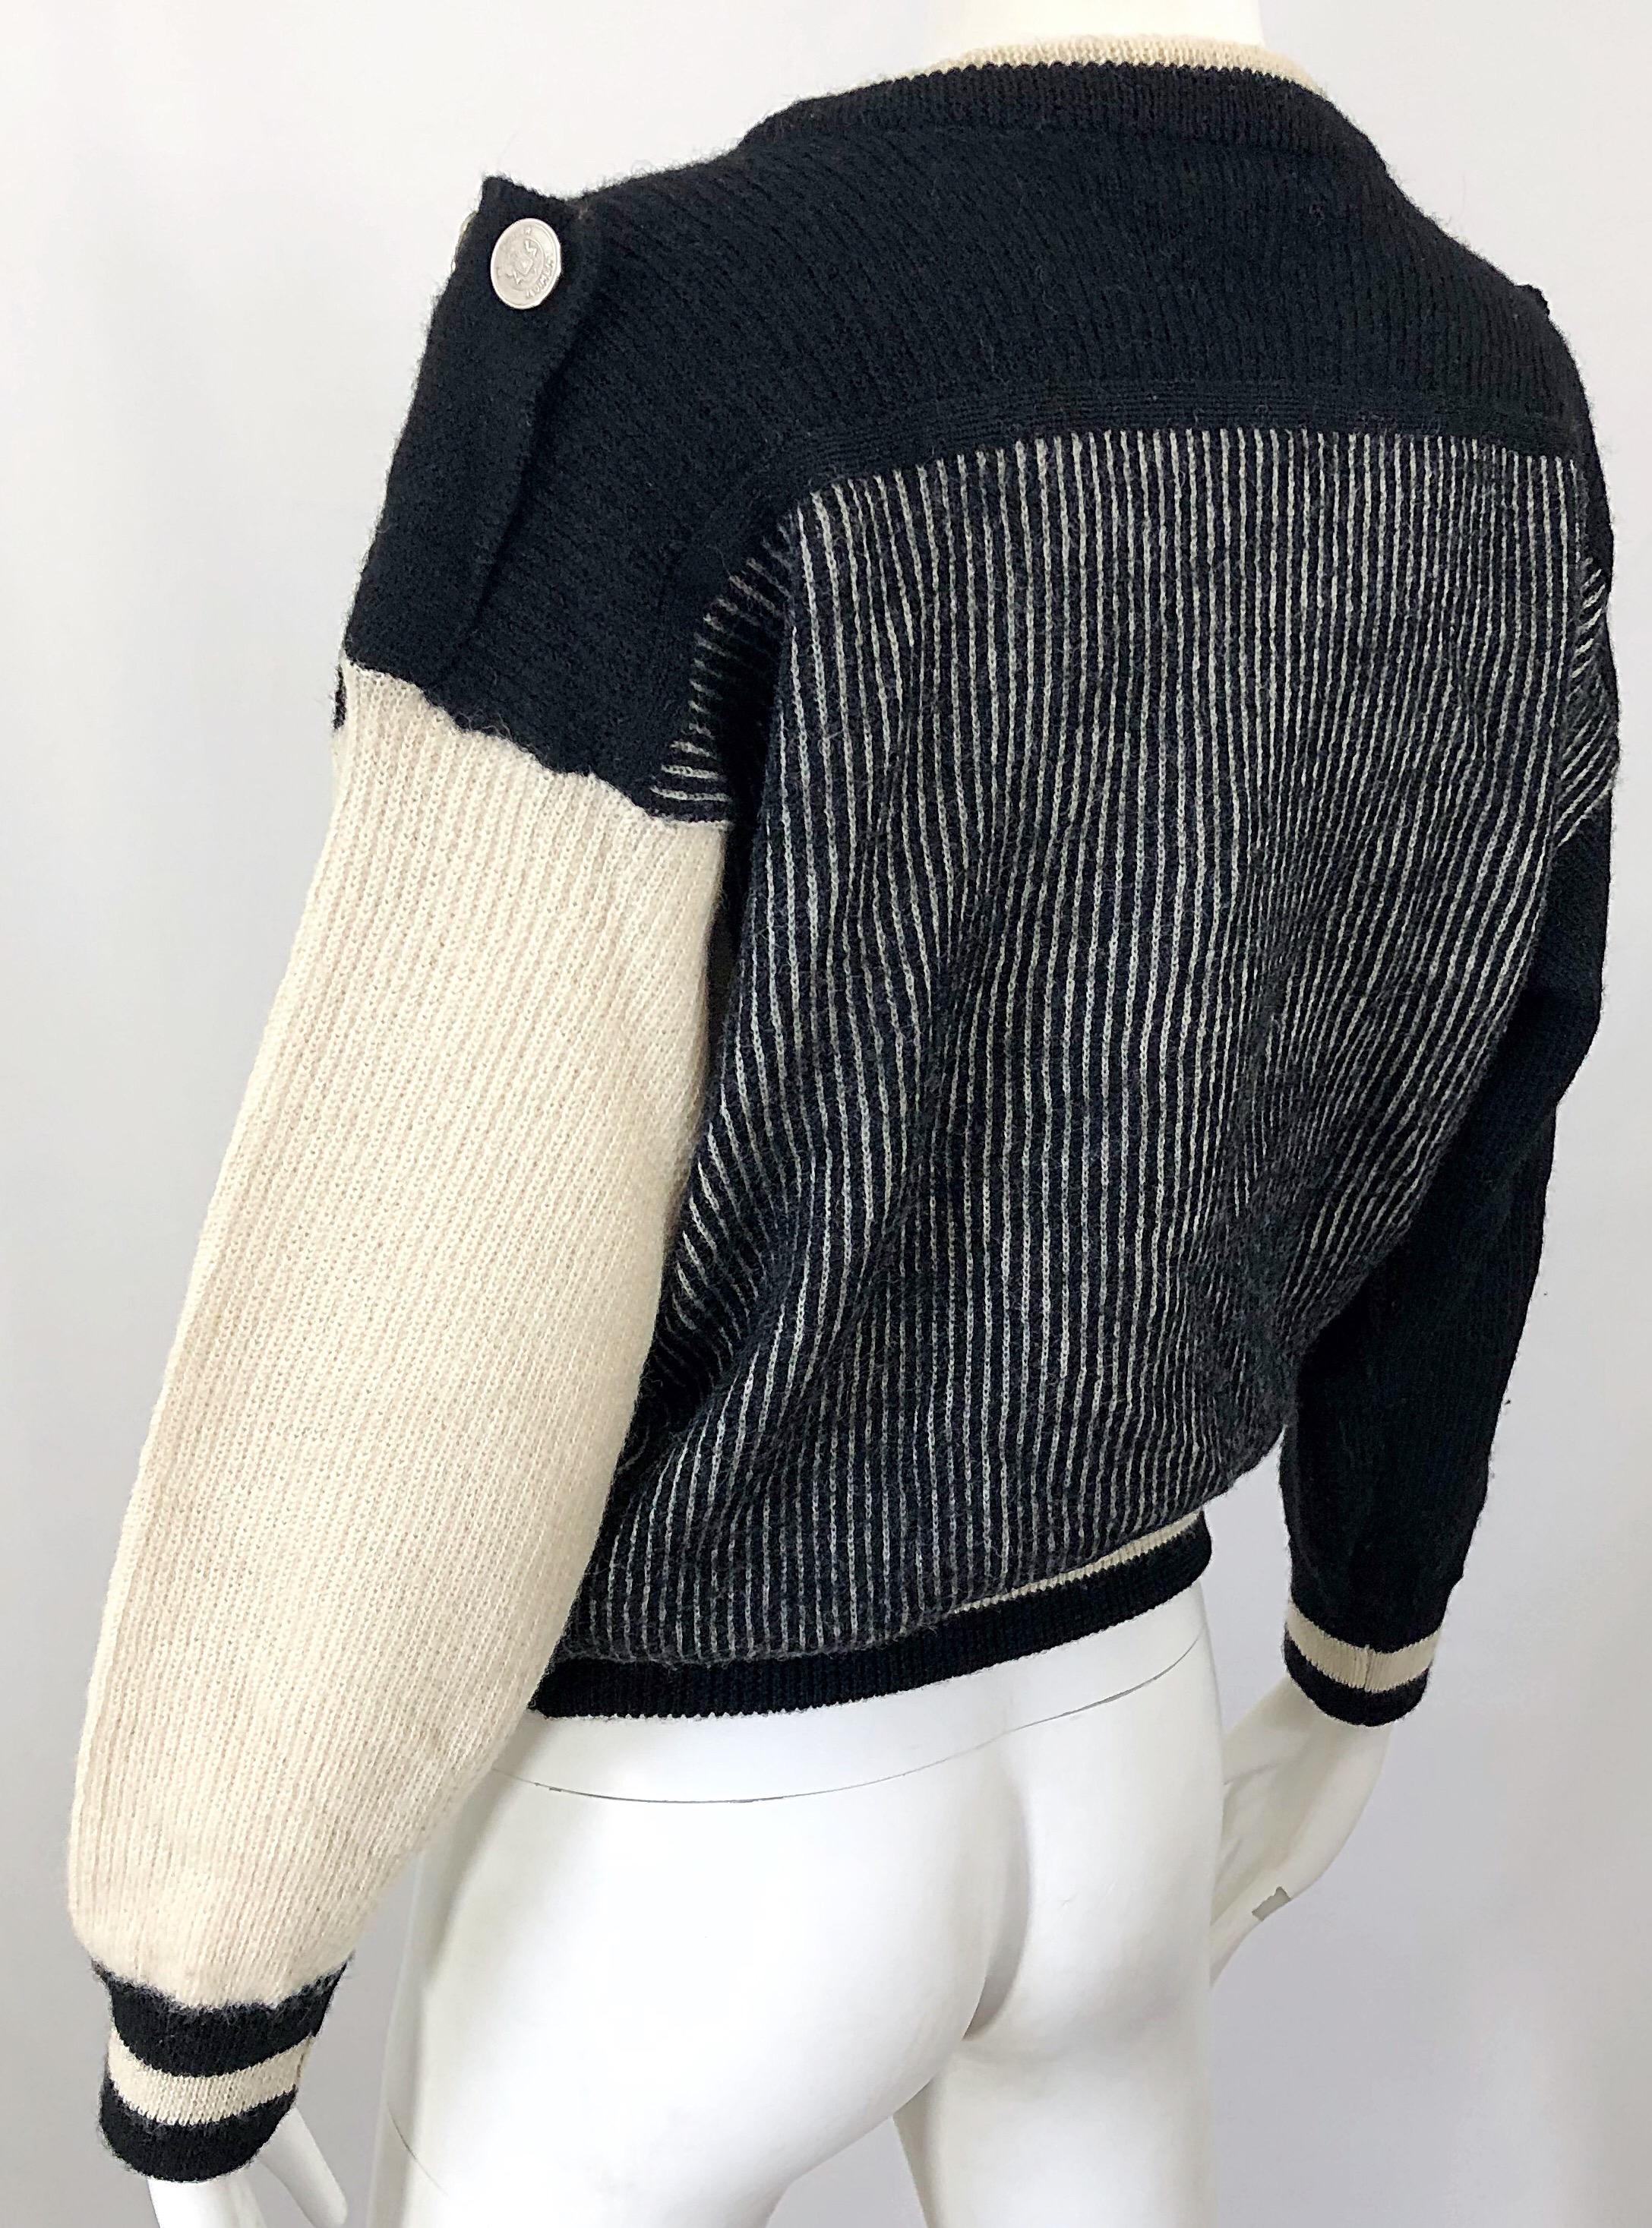 Rare 1980s Kansai Yamamoto Avant Garde Varsity Collegiate Wool Vintage Sweater In Excellent Condition For Sale In San Diego, CA